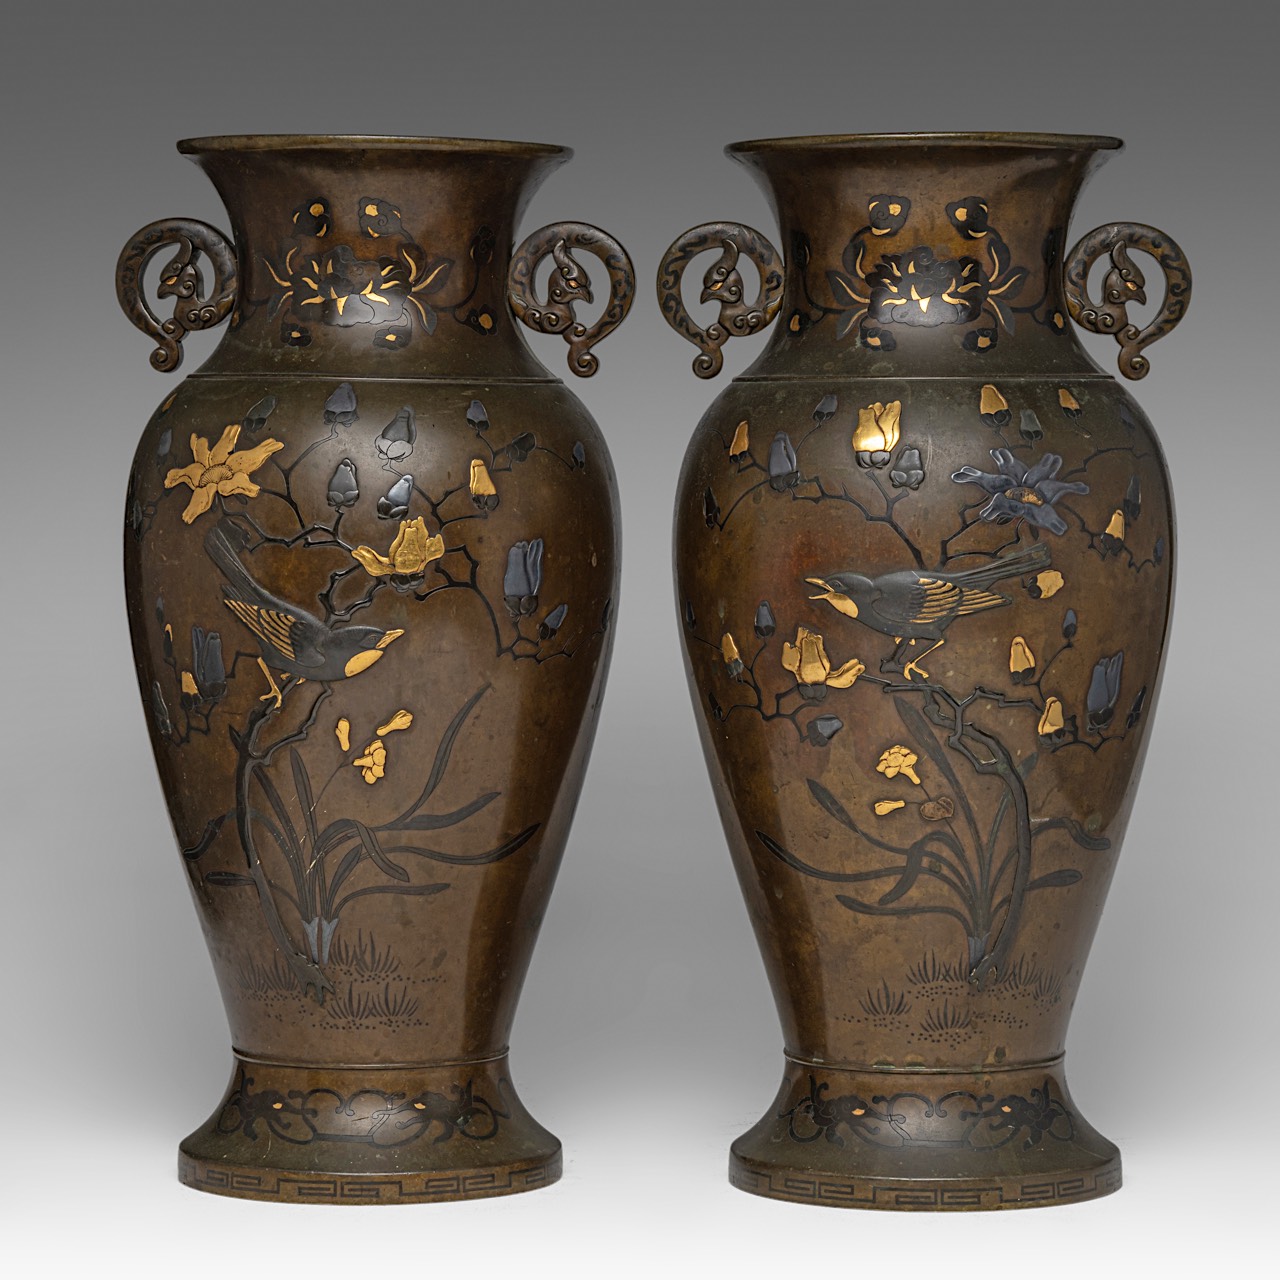 A pair of Japanese bronze 'Phoenix' vases with gilt details, Meiji period (1868-1912), both H 41,5 c - Image 3 of 6